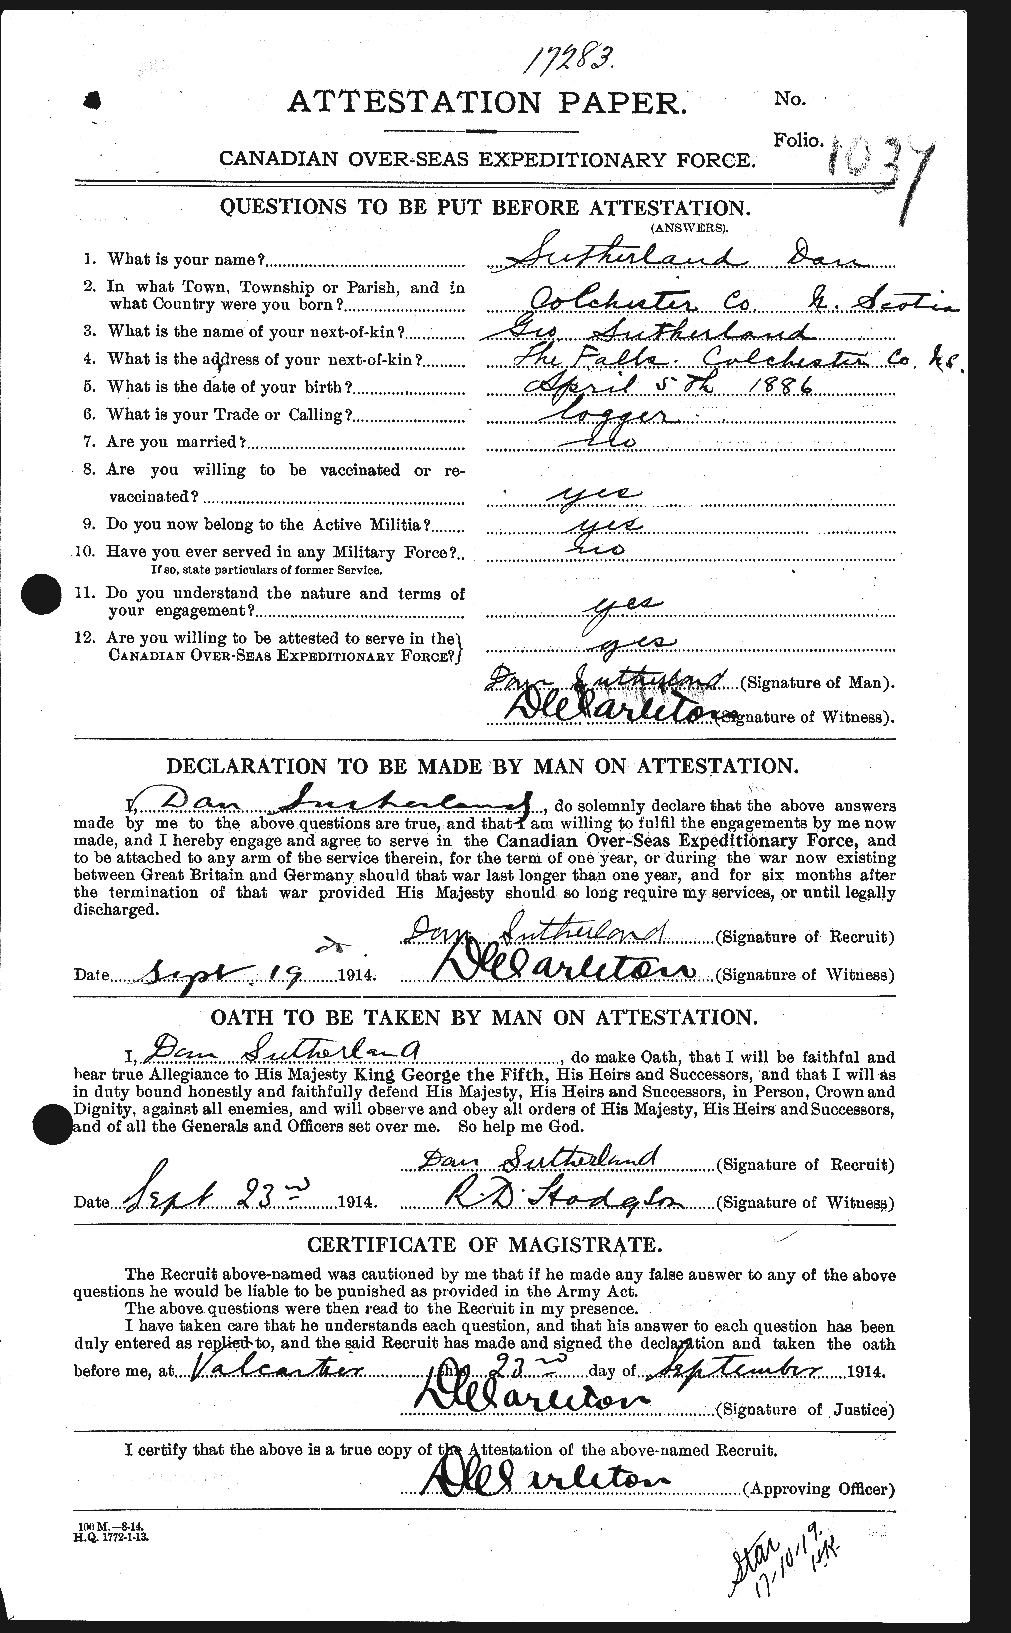 Personnel Records of the First World War - CEF 125282a